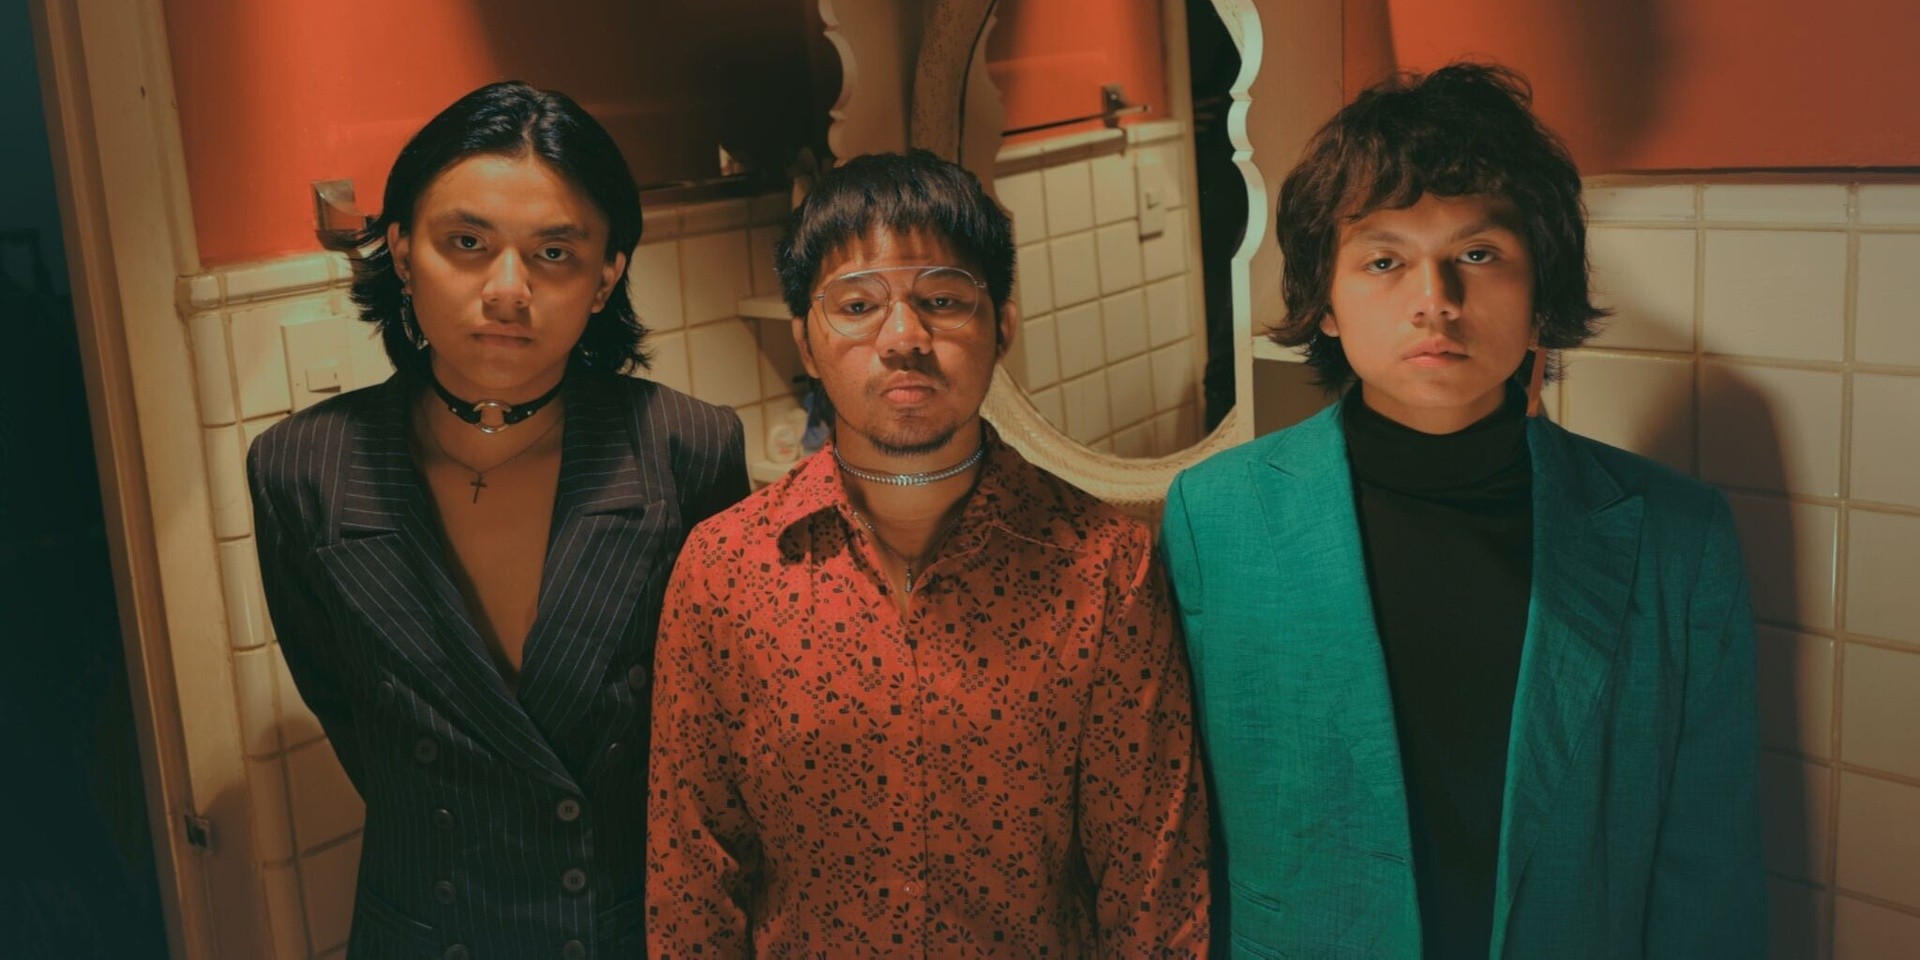 IV of Spades tease something new with cryptic post